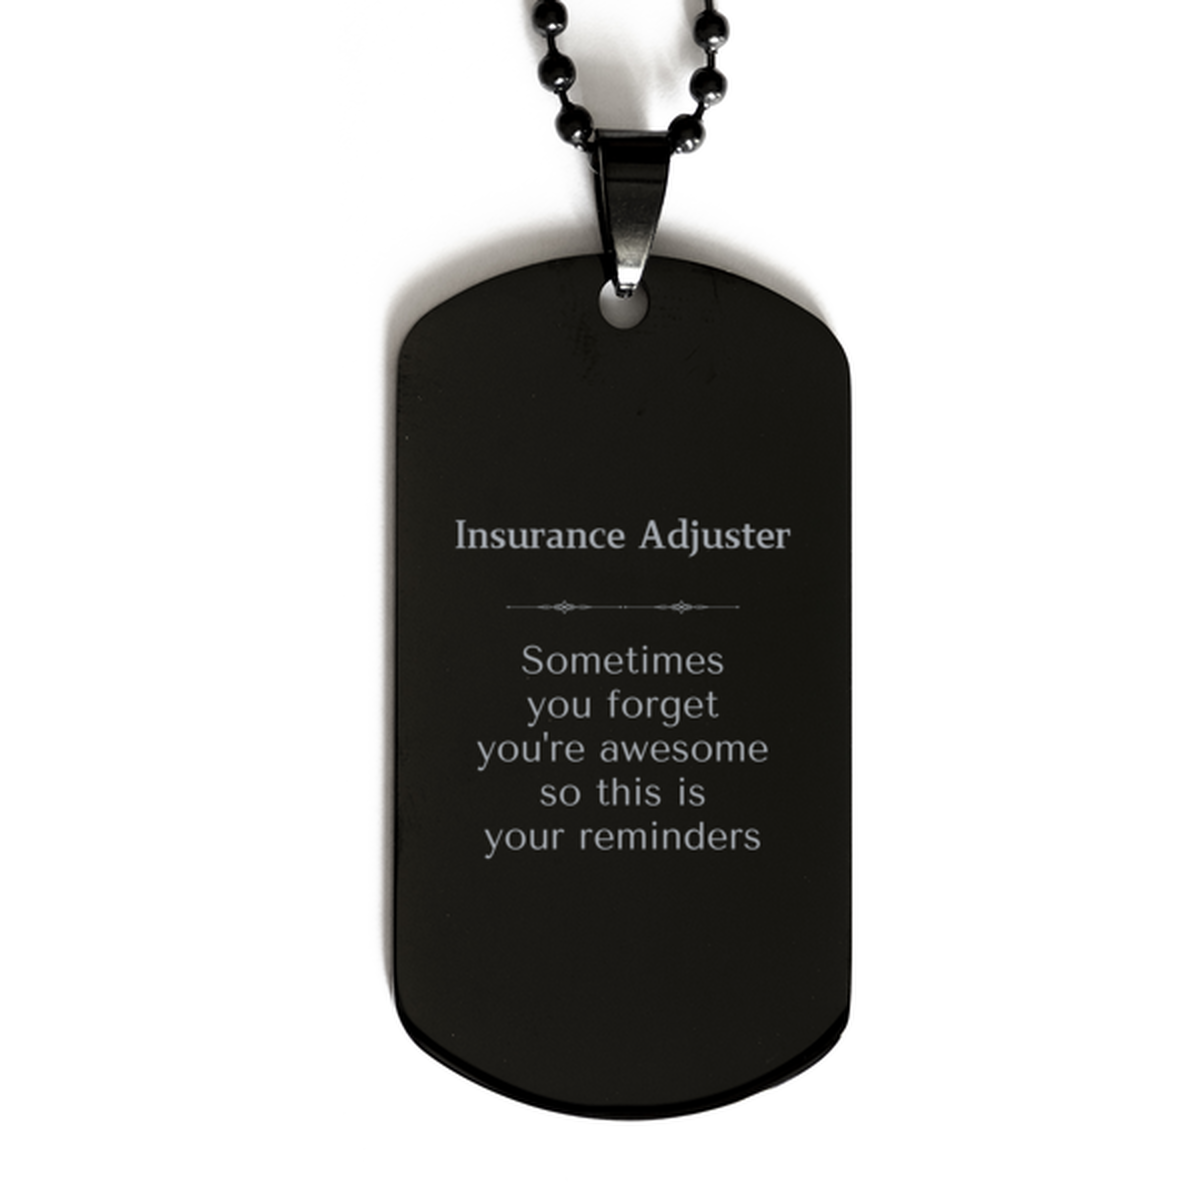 Sentimental Insurance Adjuster Black Dog Tag, Insurance Adjuster Sometimes you forget you're awesome so this is your reminders, Graduation Christmas Birthday Gifts for Insurance Adjuster, Men, Women, Coworkers